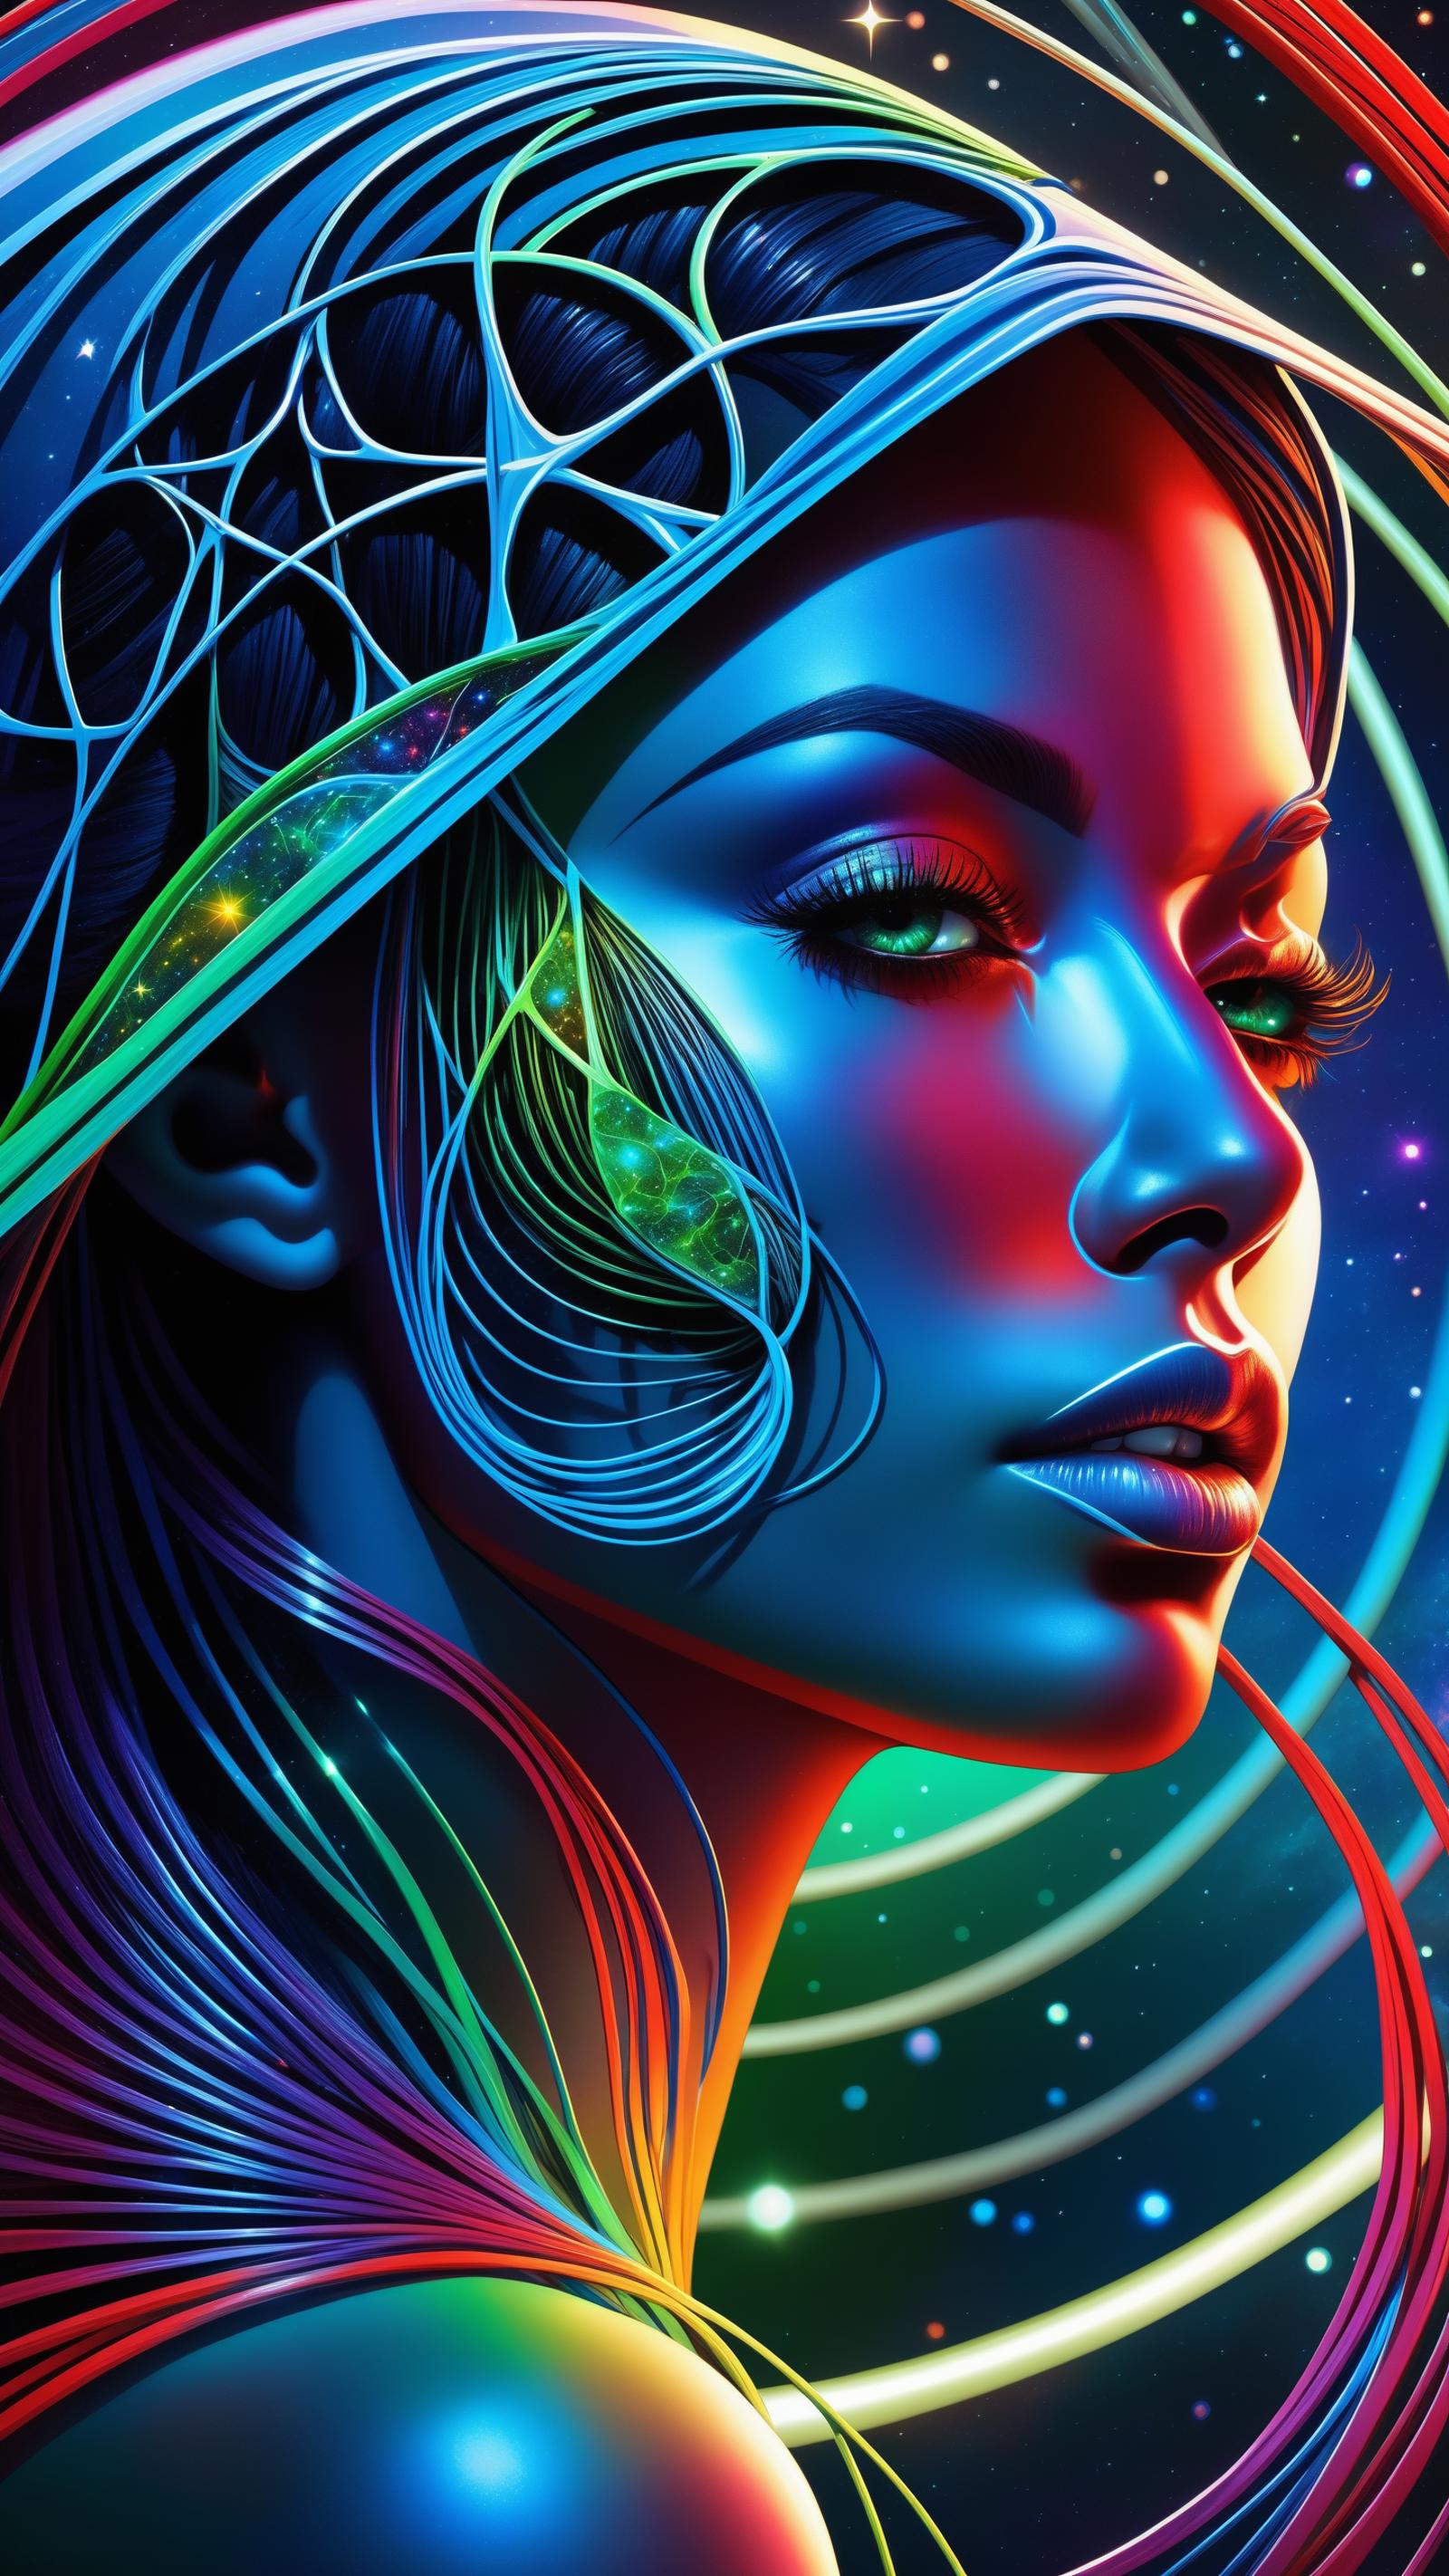 Illustration of a woman with green eyes and vibrant blue hair, surrounded by a colorful background.